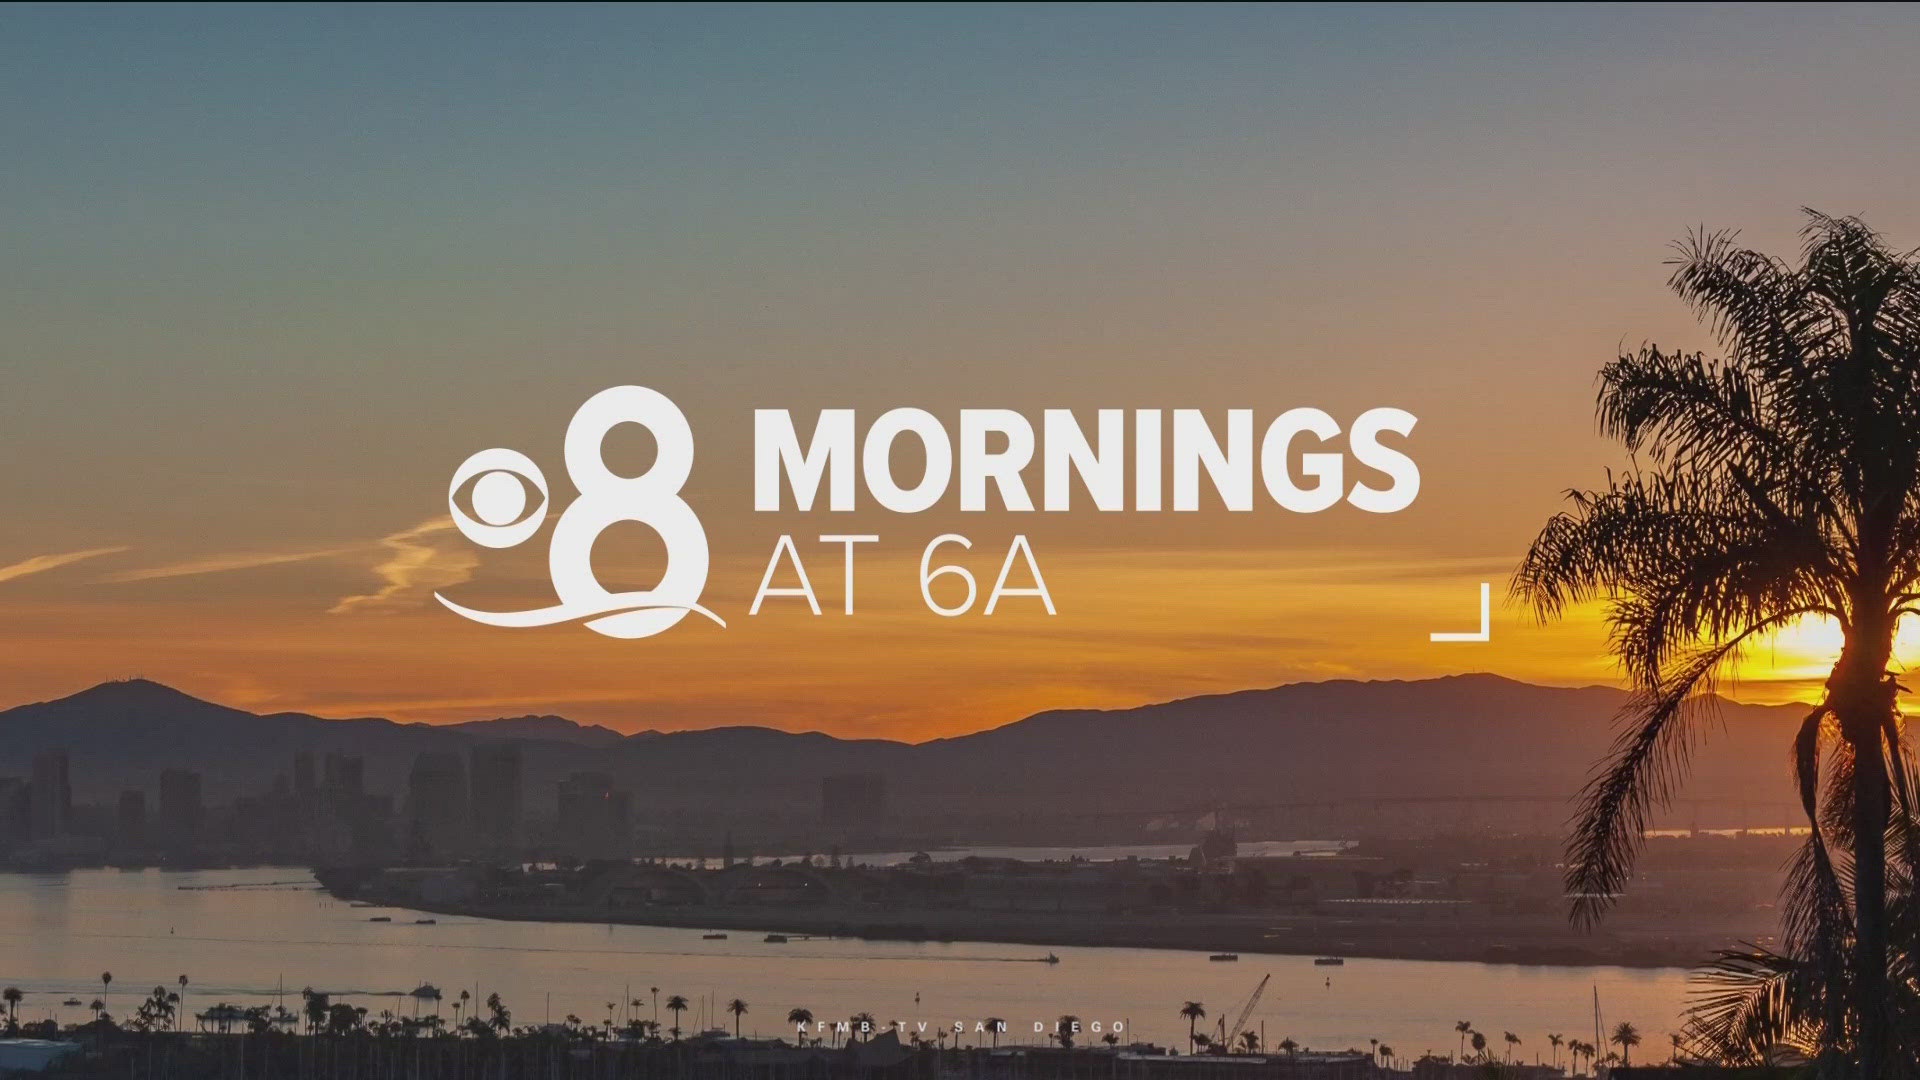 Here are the top stories around San Diego County for the morning of Wednesday, May 15th.
For the latest news, weather and sports, head to:
https://www.cbs8.com/